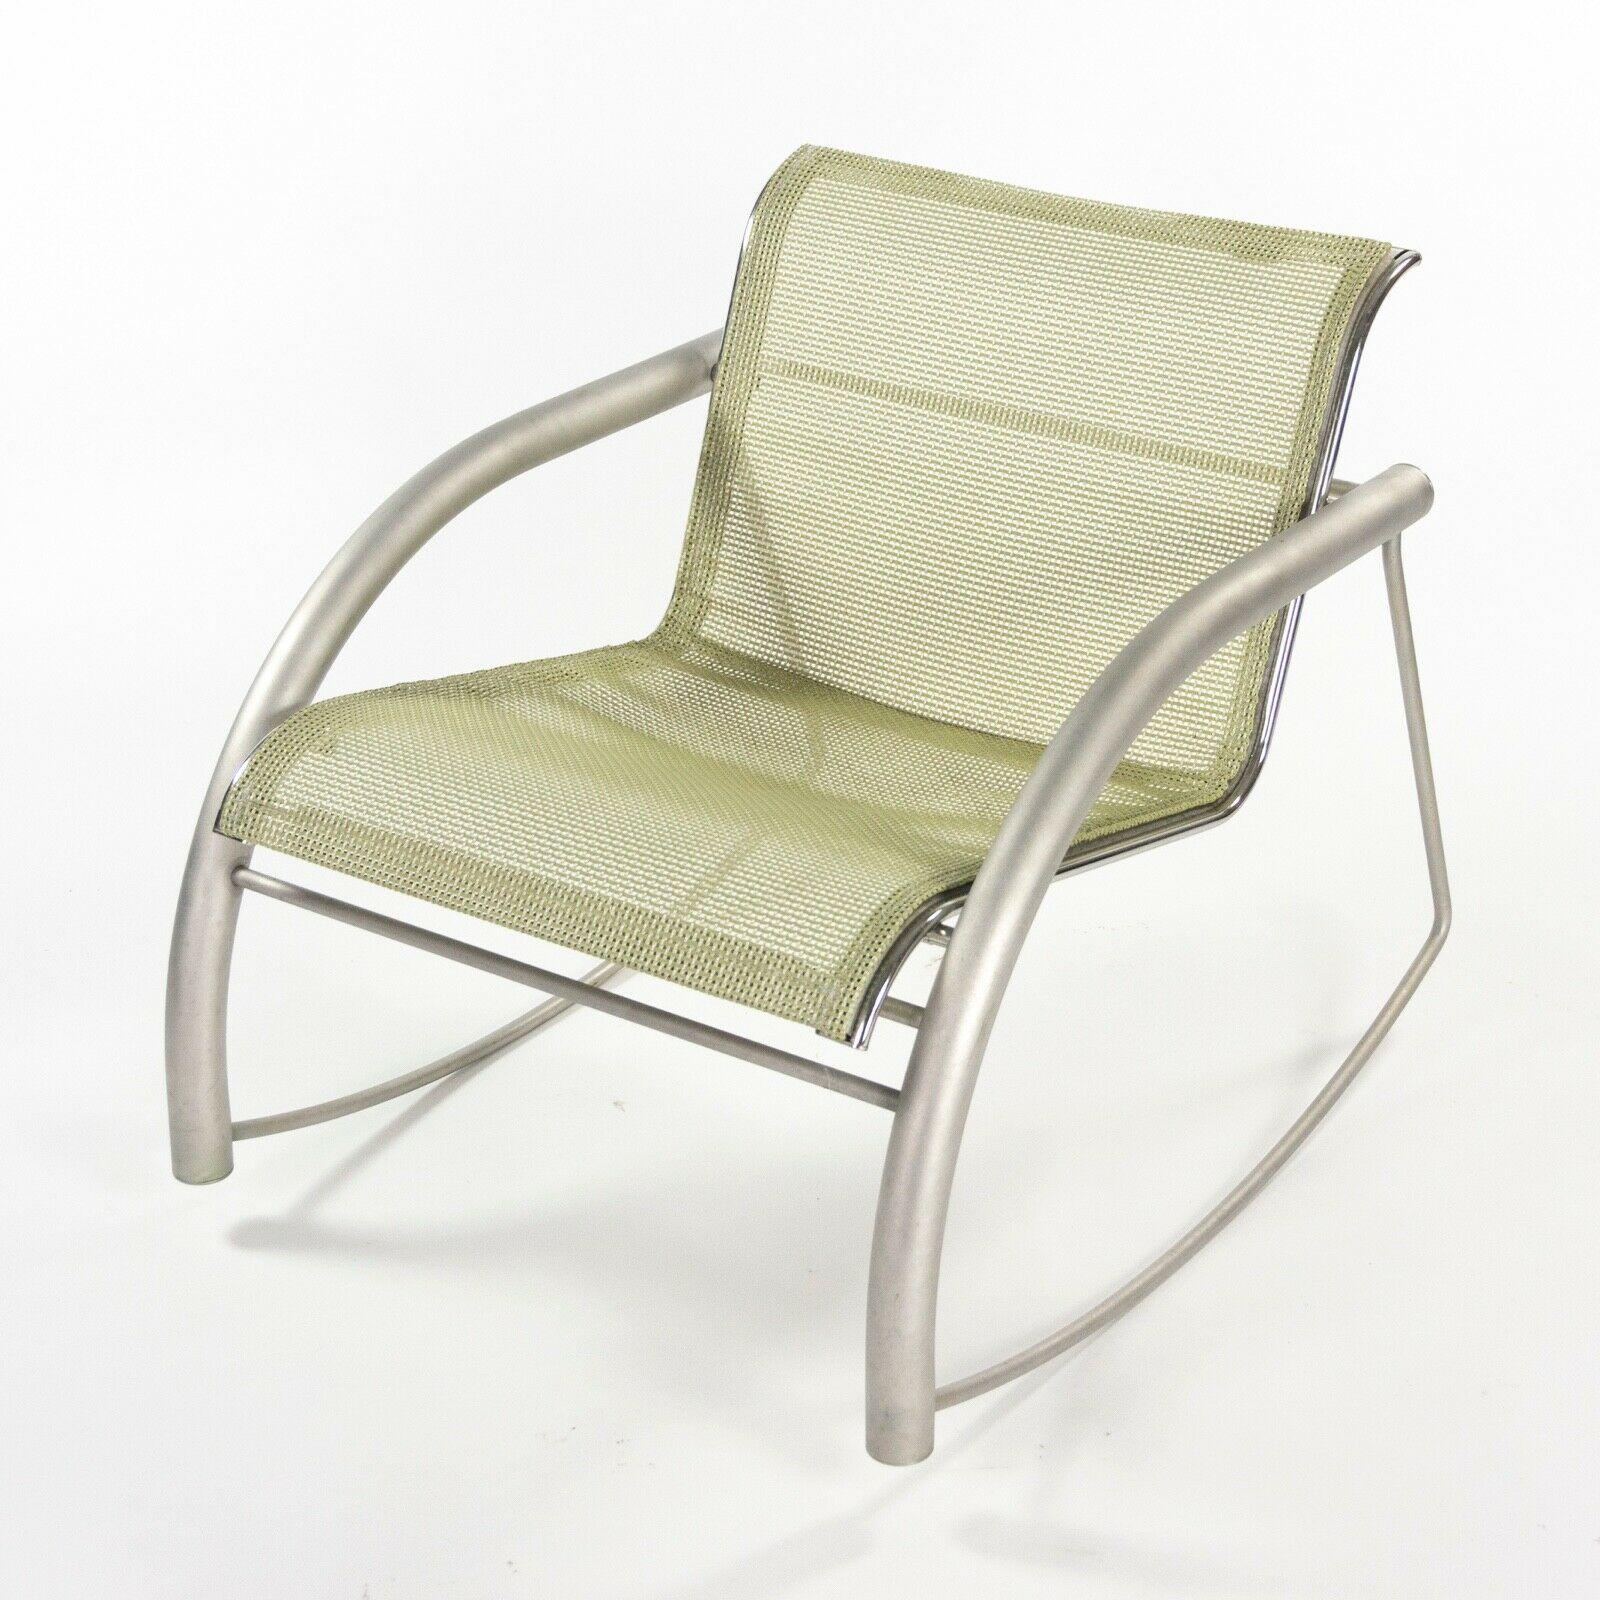 
Listed for sale is a Richard Schultz 2002 Collection stainless steel rocking chair prototype with mesh upholstery. This is a marvelous and rare example of a 2002 collection rocking chair, produced in 2001. The stainless steel frame is in terrific